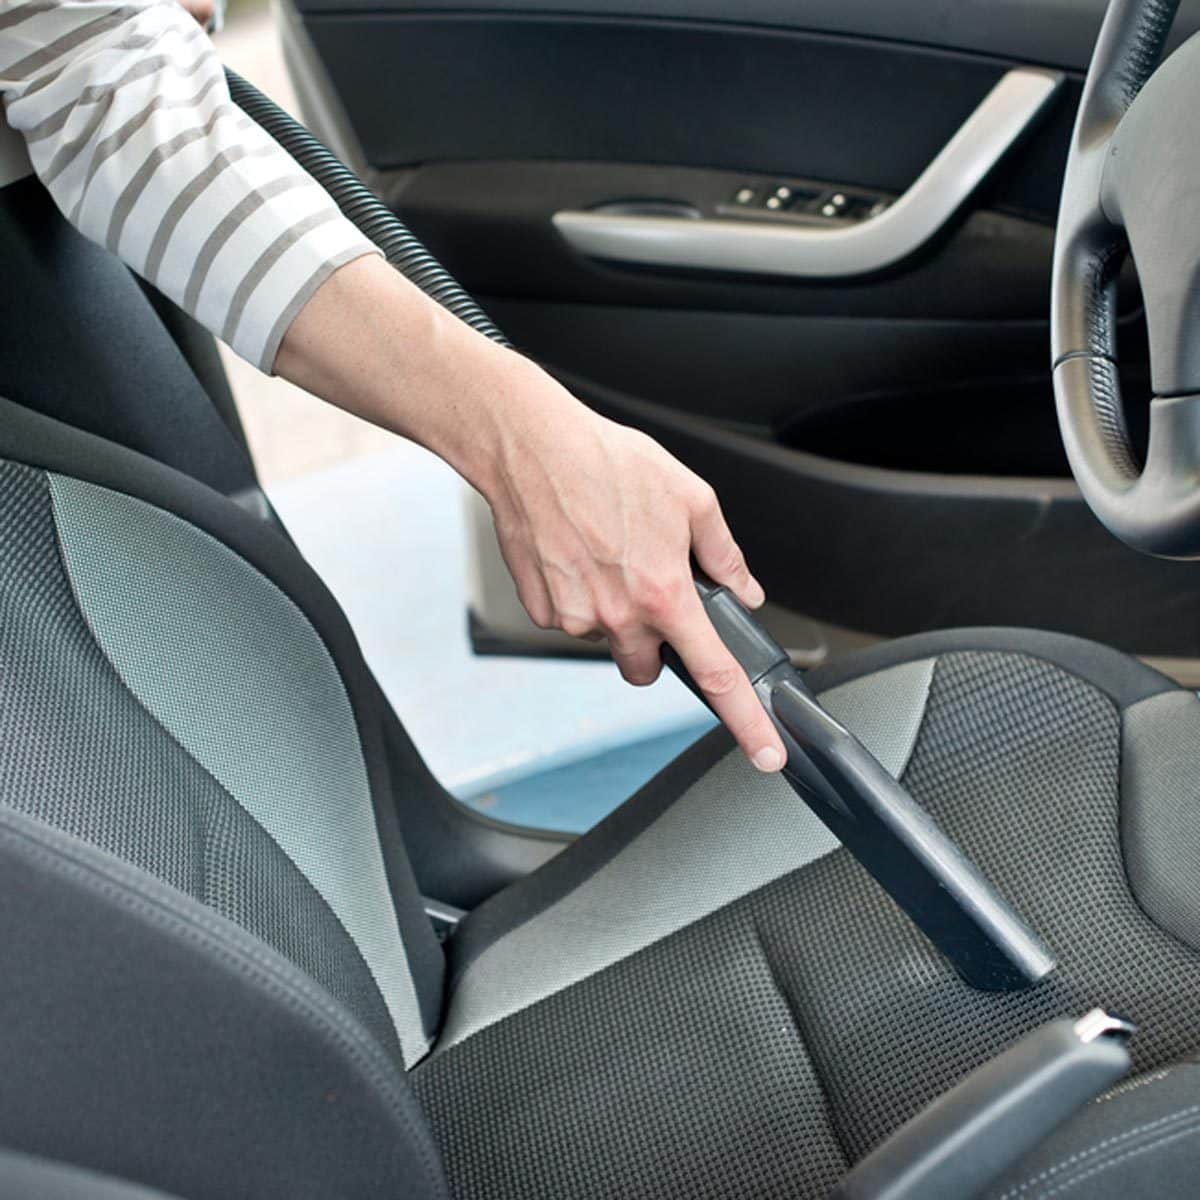 10 Cleaning Tips for the Inside of Your Car